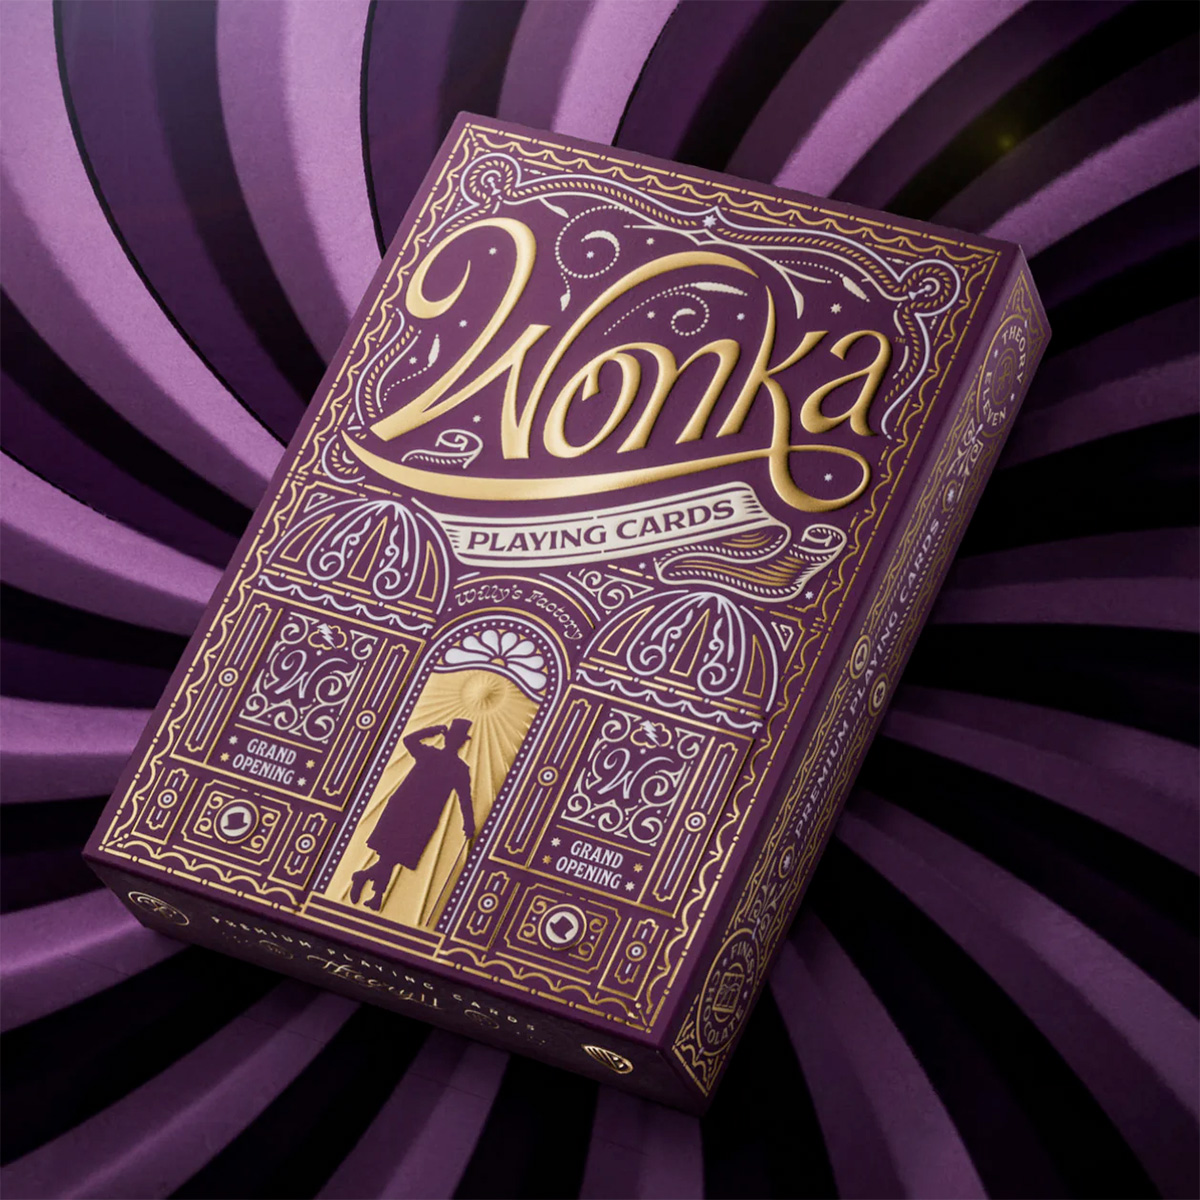 Wonka Movie Deluxe Deck with Premium Cards from Theory11